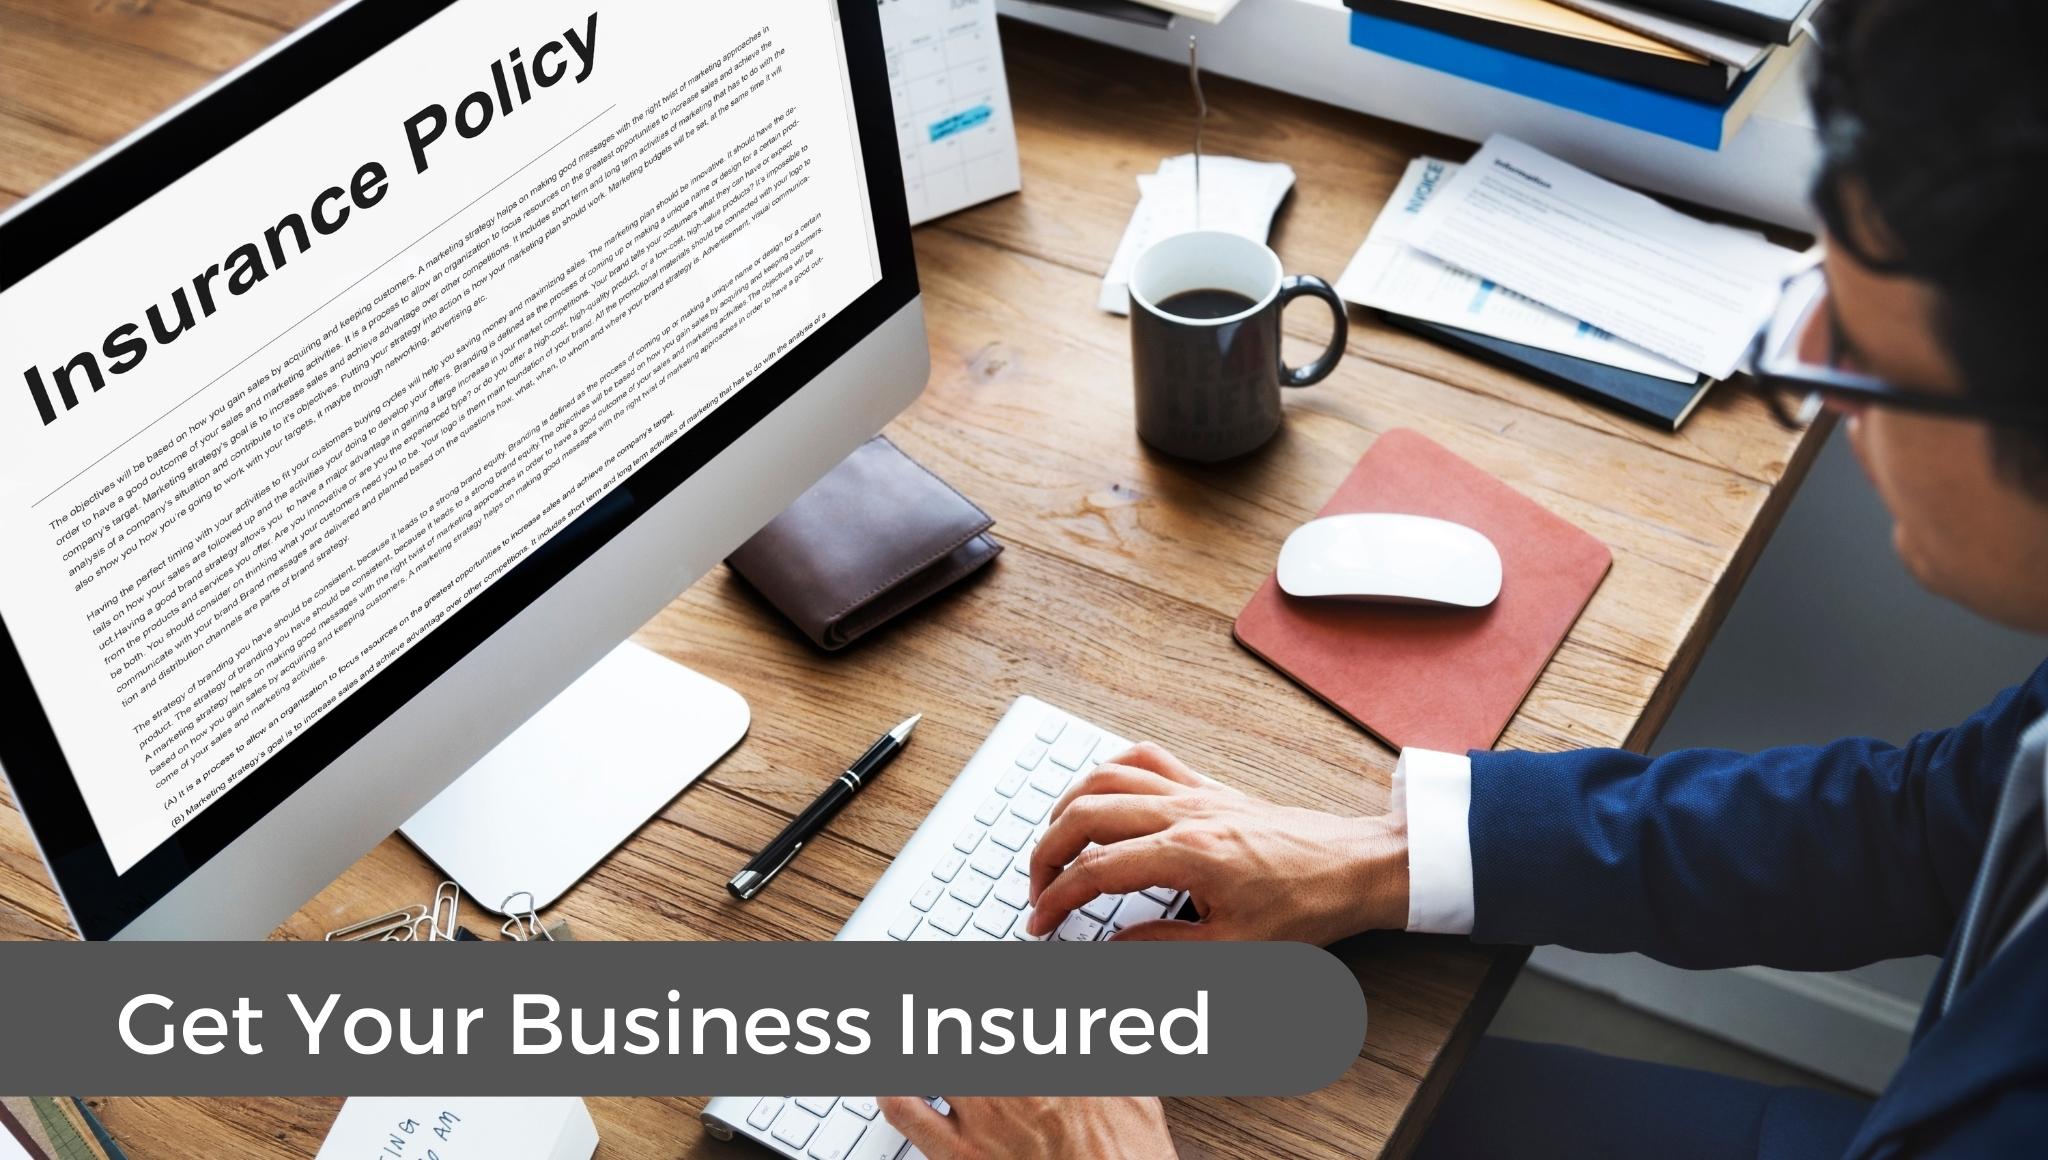 Get your business insured